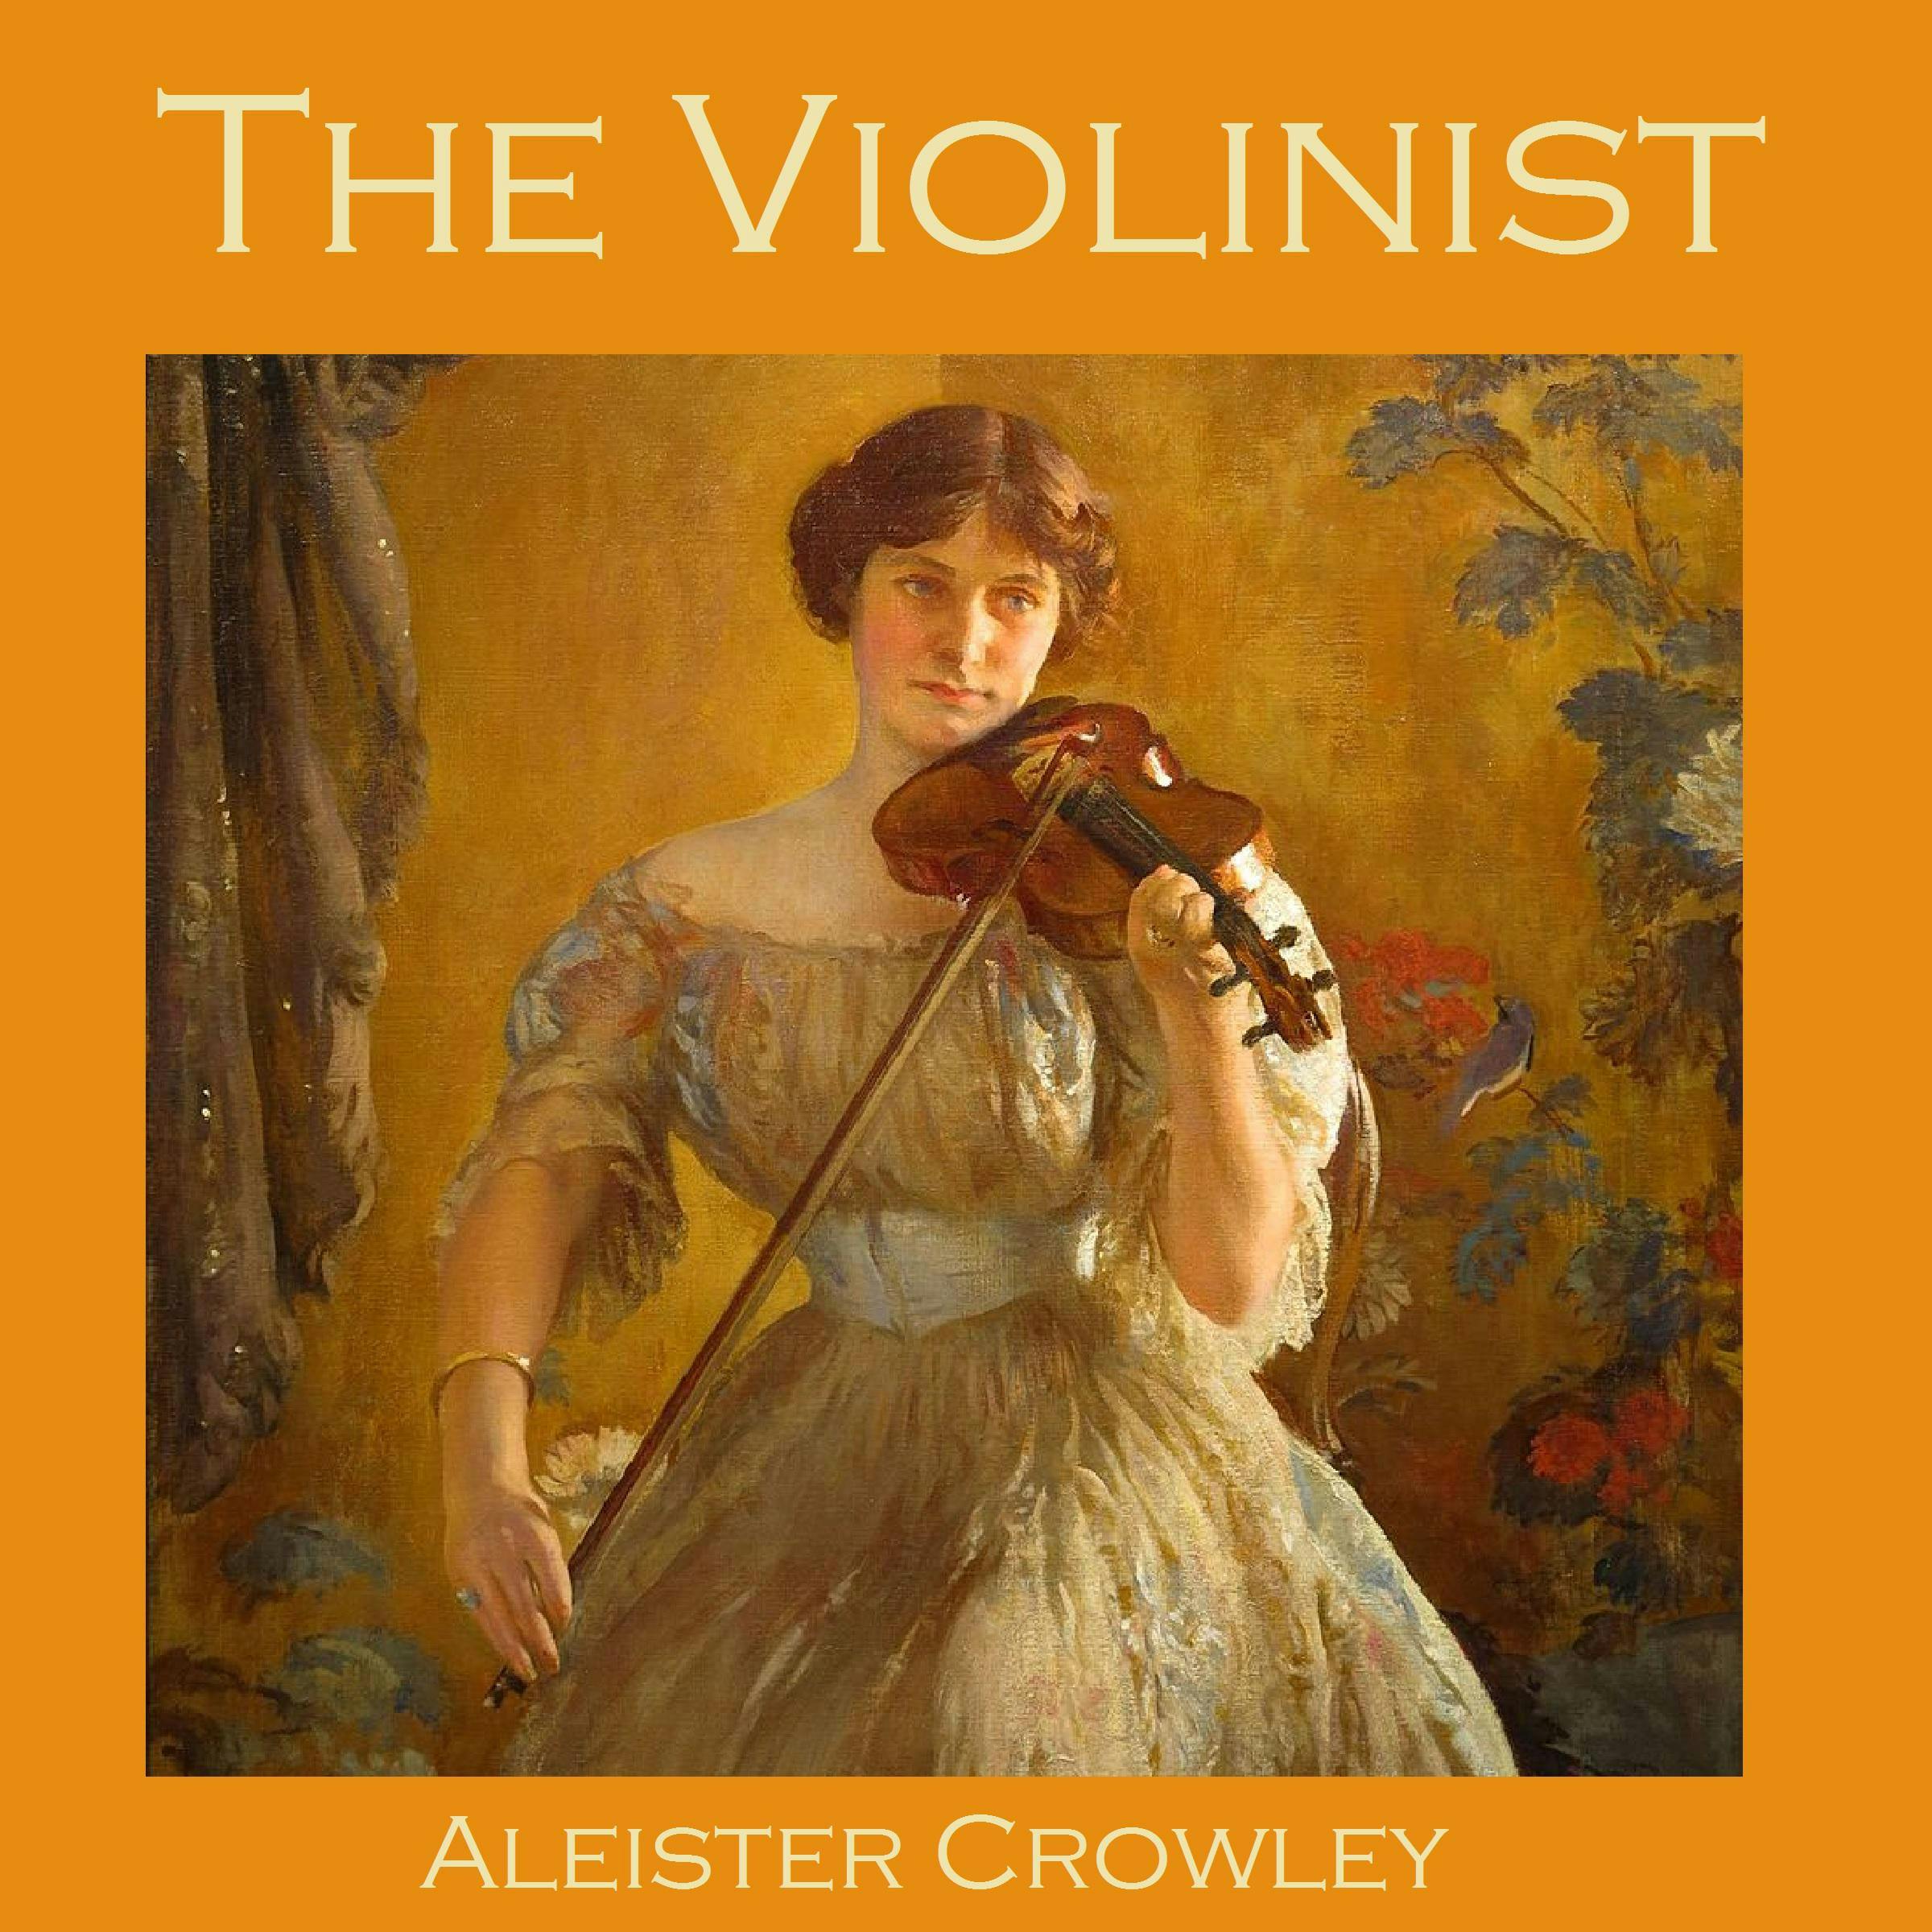 The Violinist - Aleister Crowley